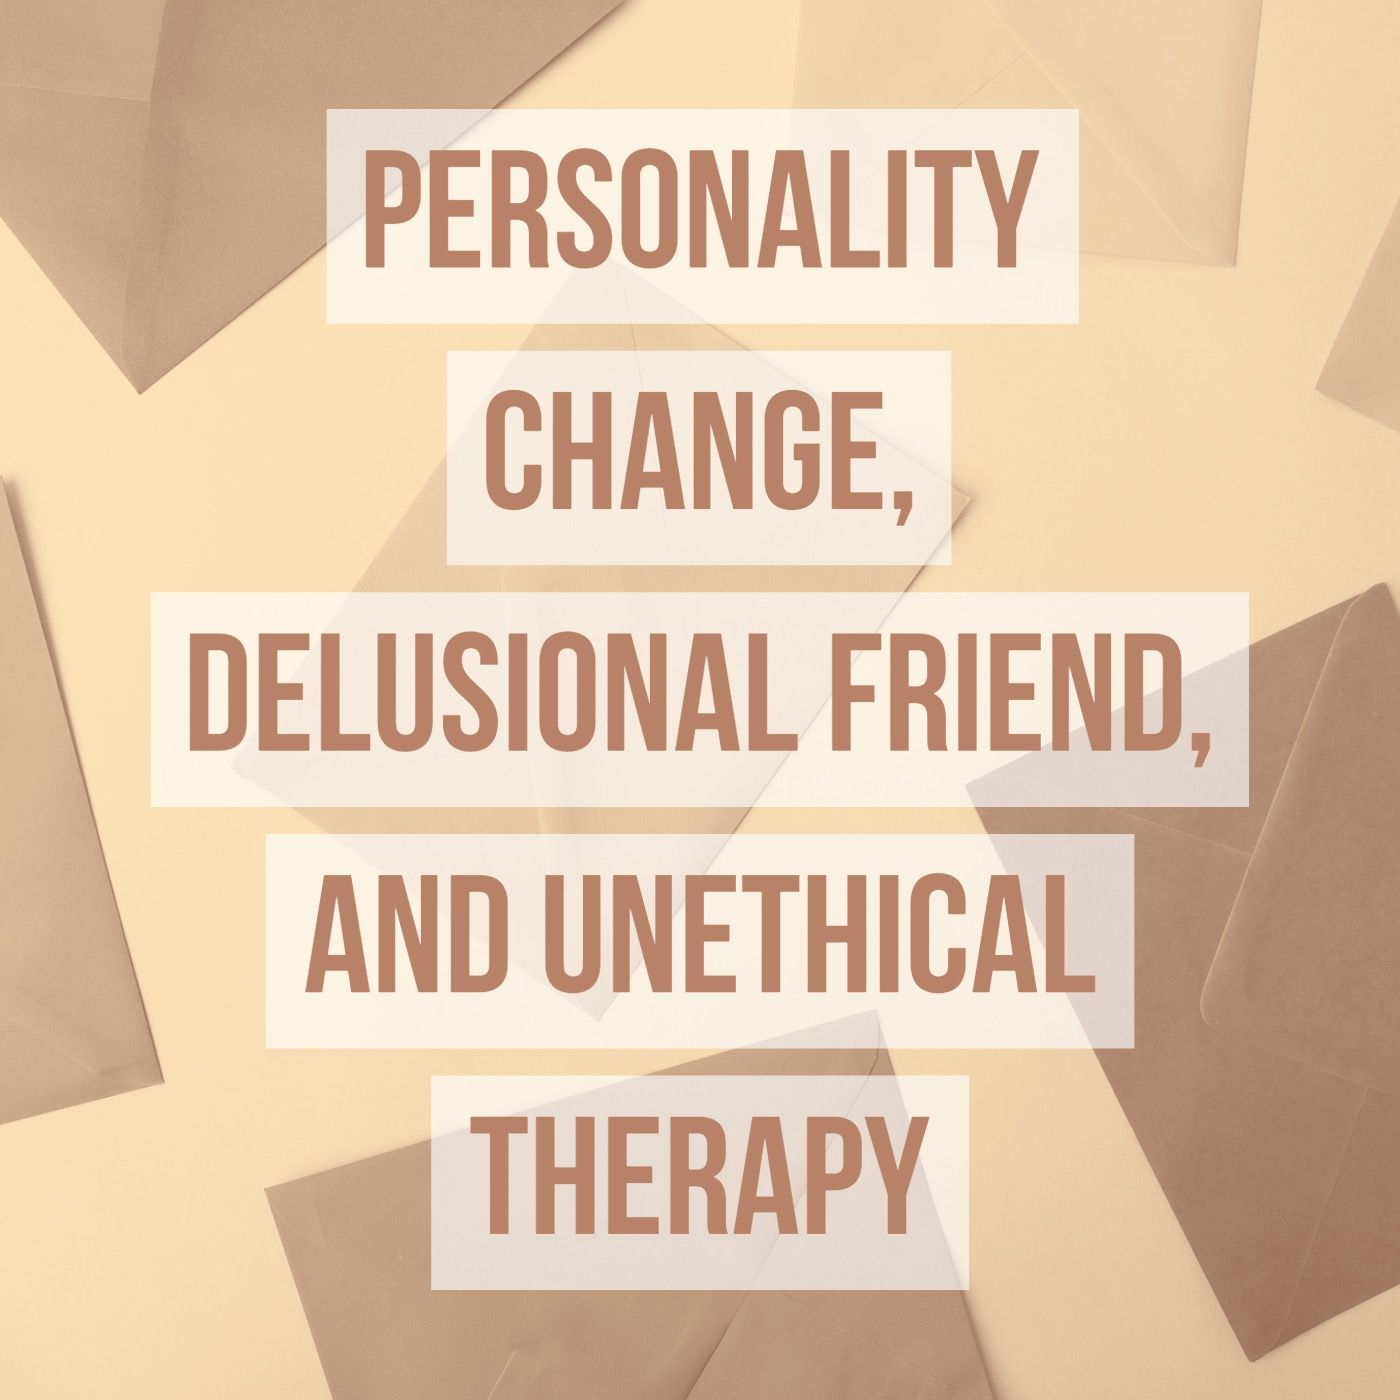 Personality Change, Delusional Friend, and Unethical Therapy